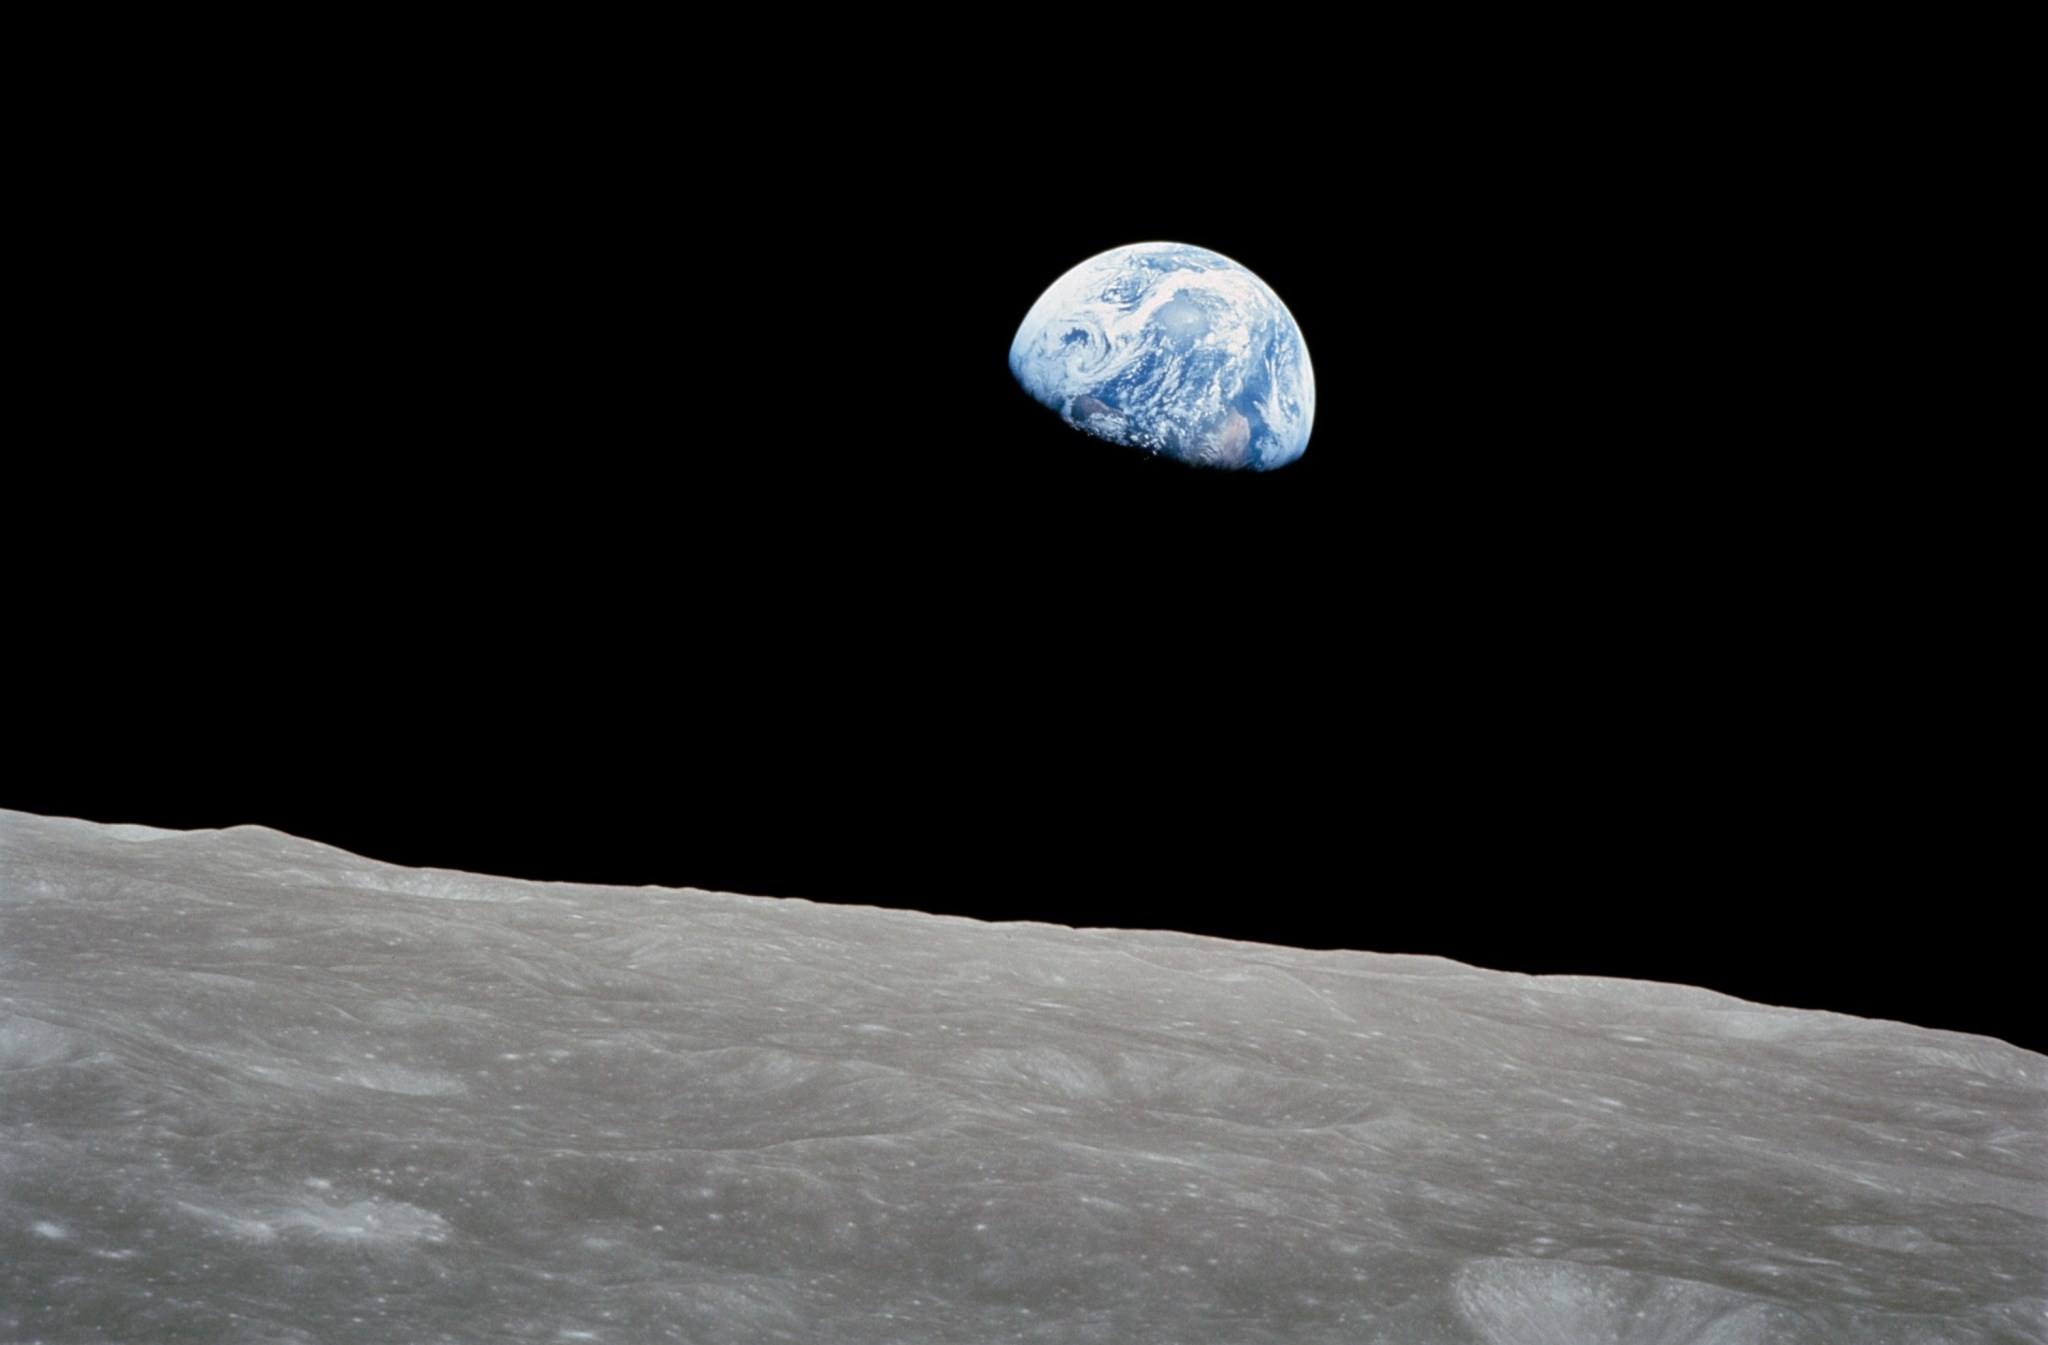 The famous Earthrise photograph from Apollo 8